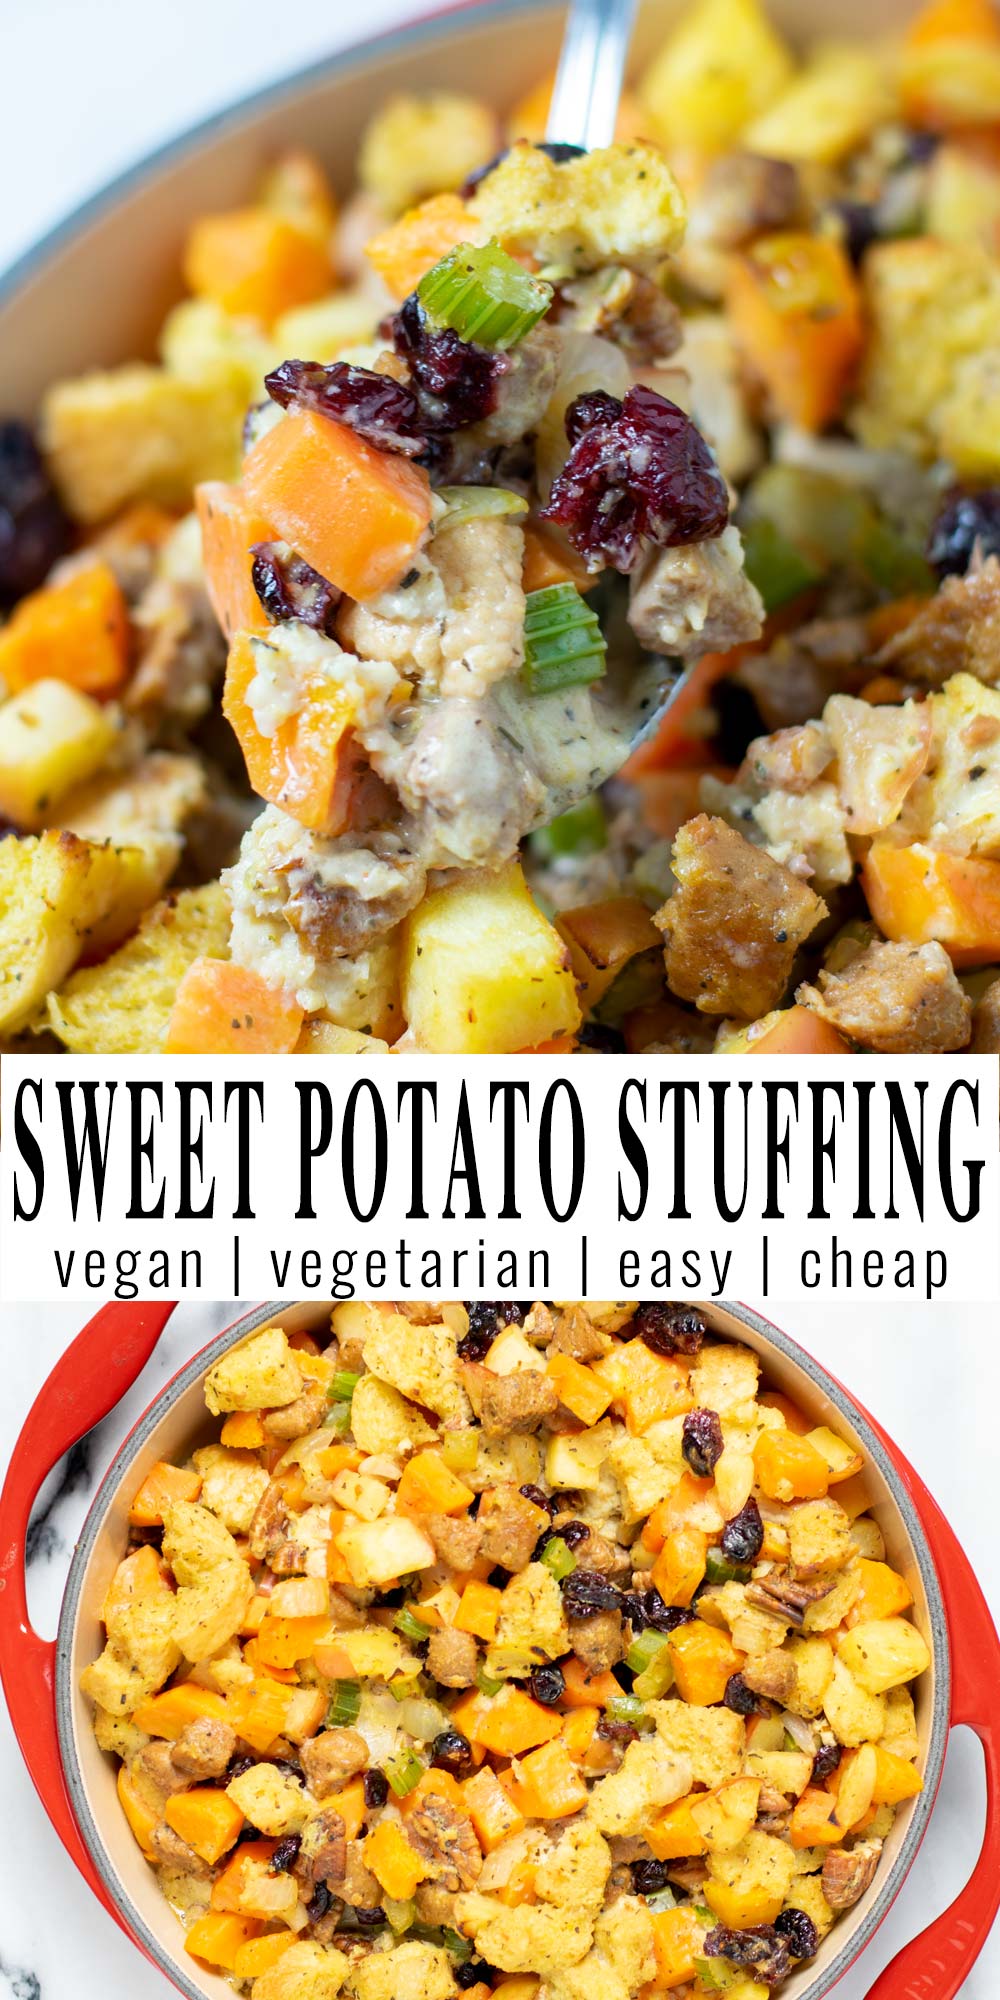 Collage of two pictures of the Sweet Potato Stuffing with recipe title text.